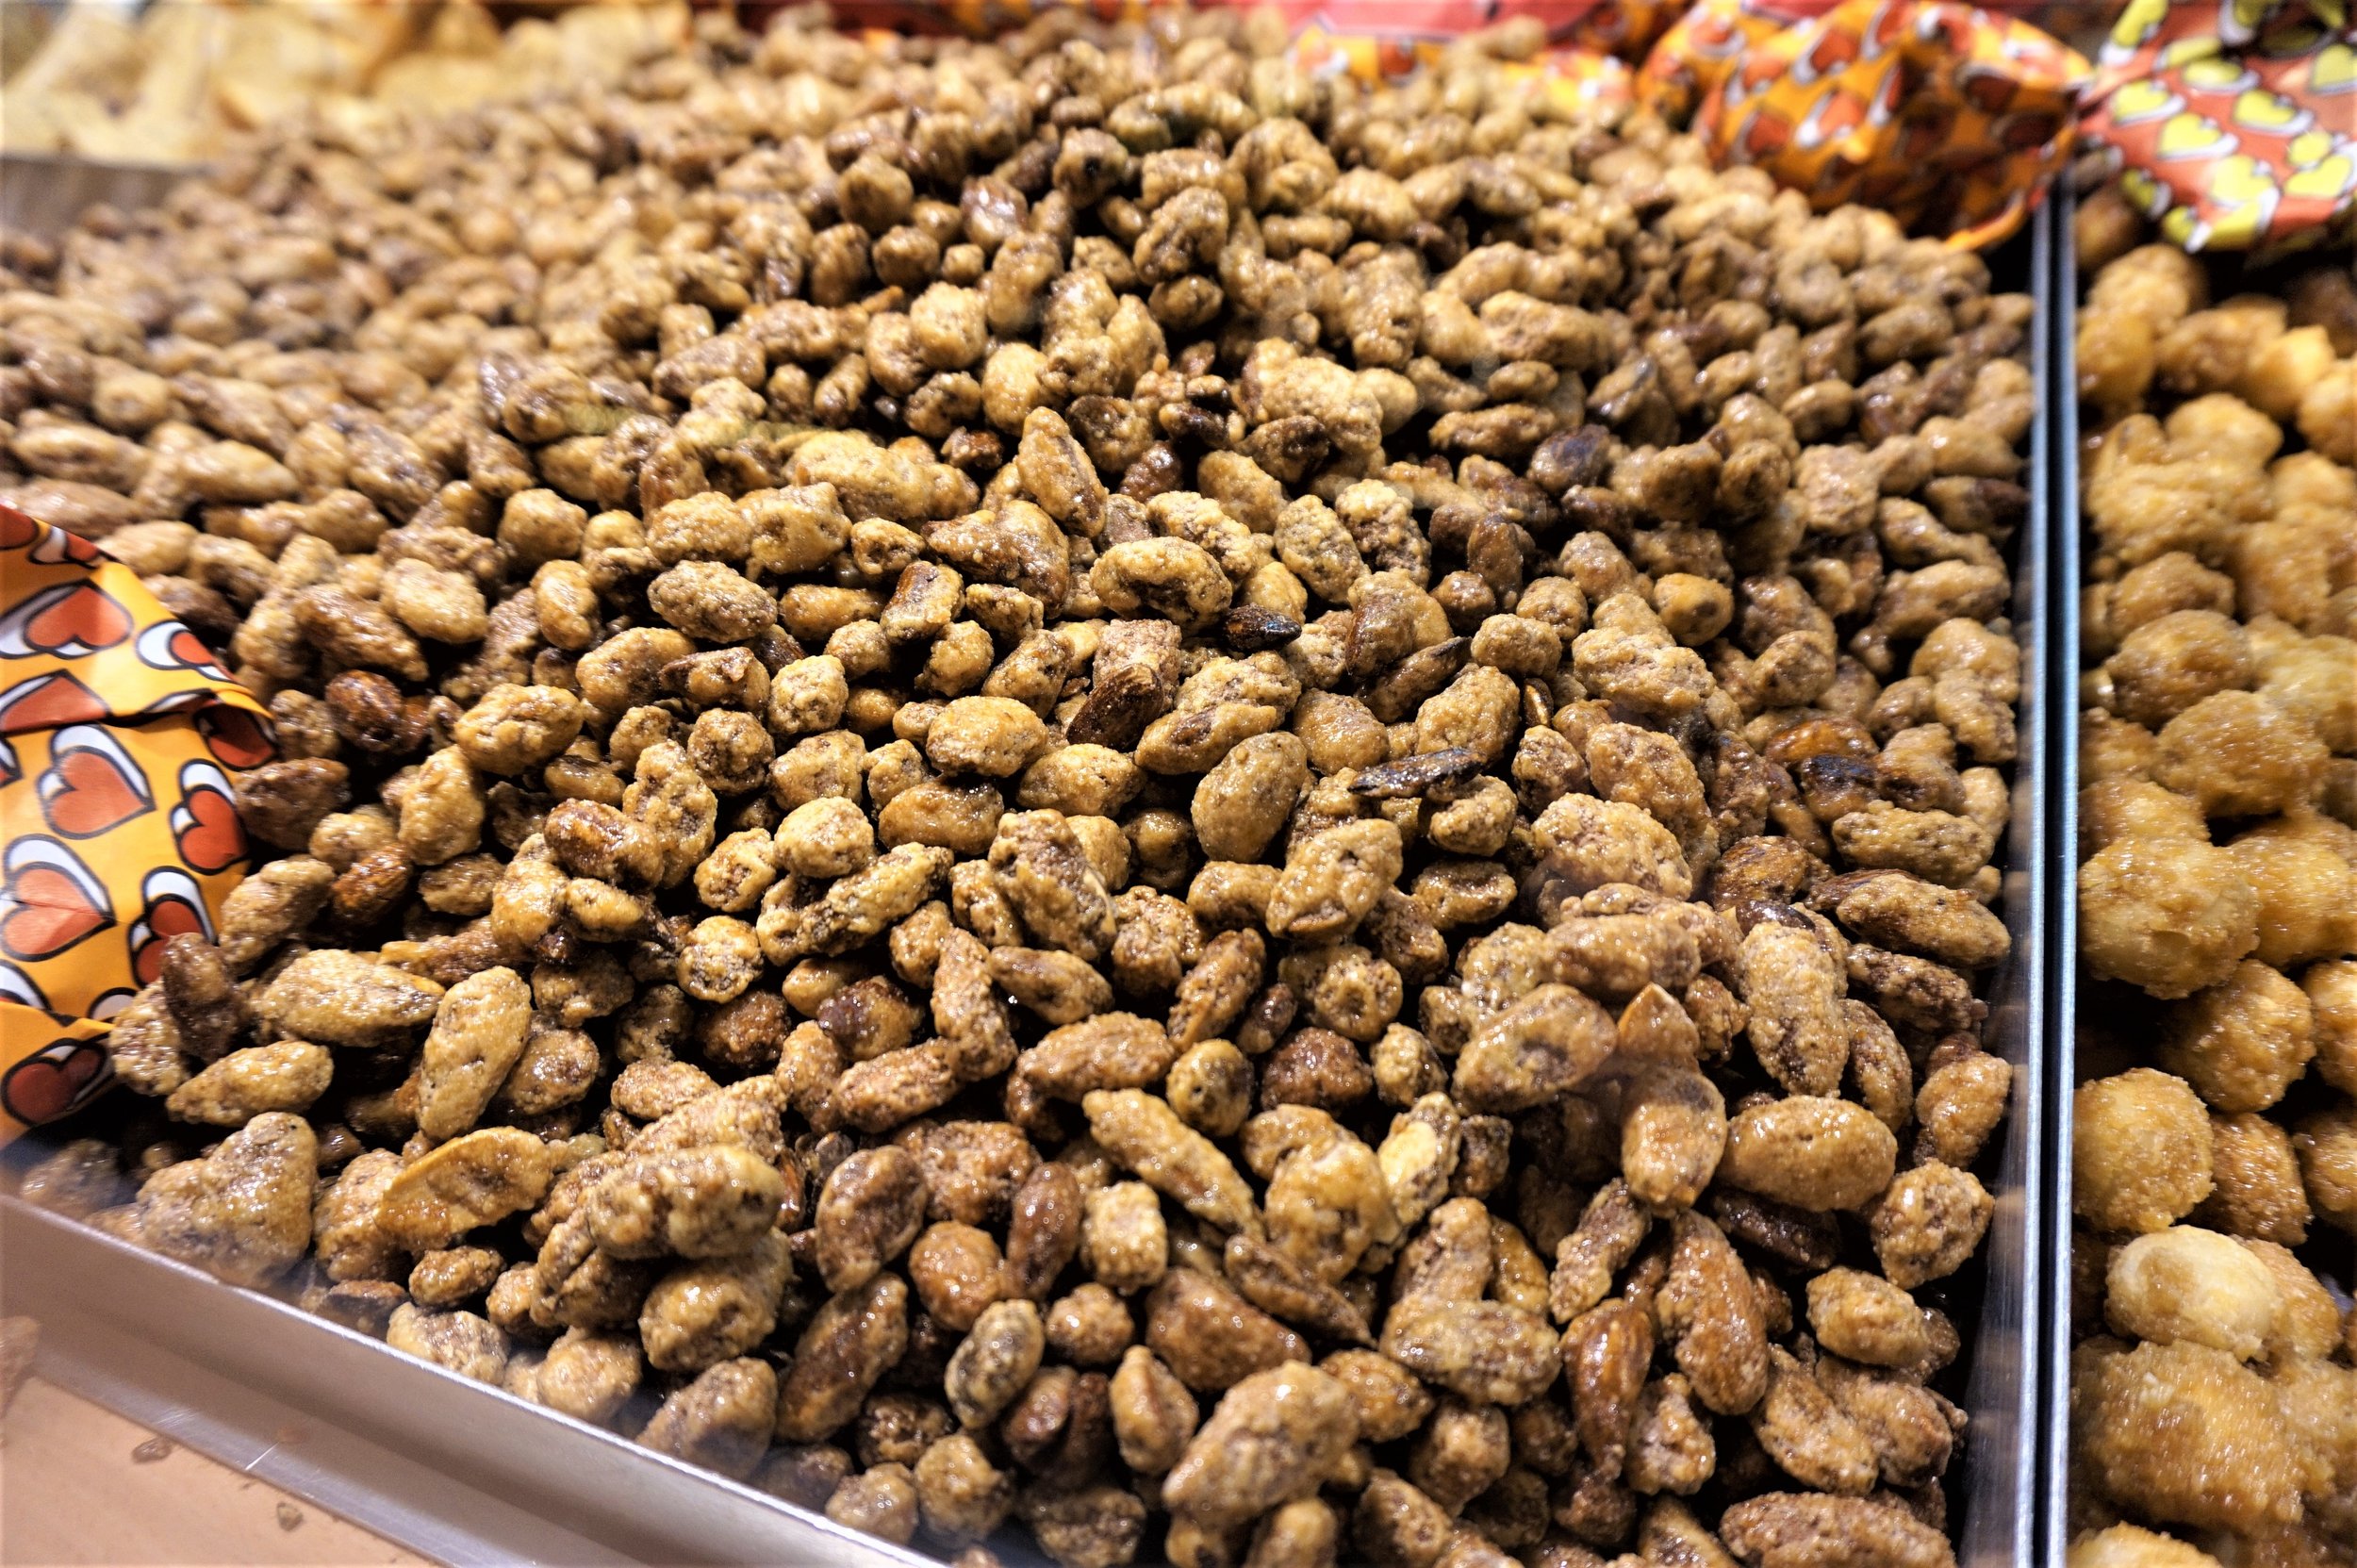  Roasted peanuts are a common treat at a German Christmas market 